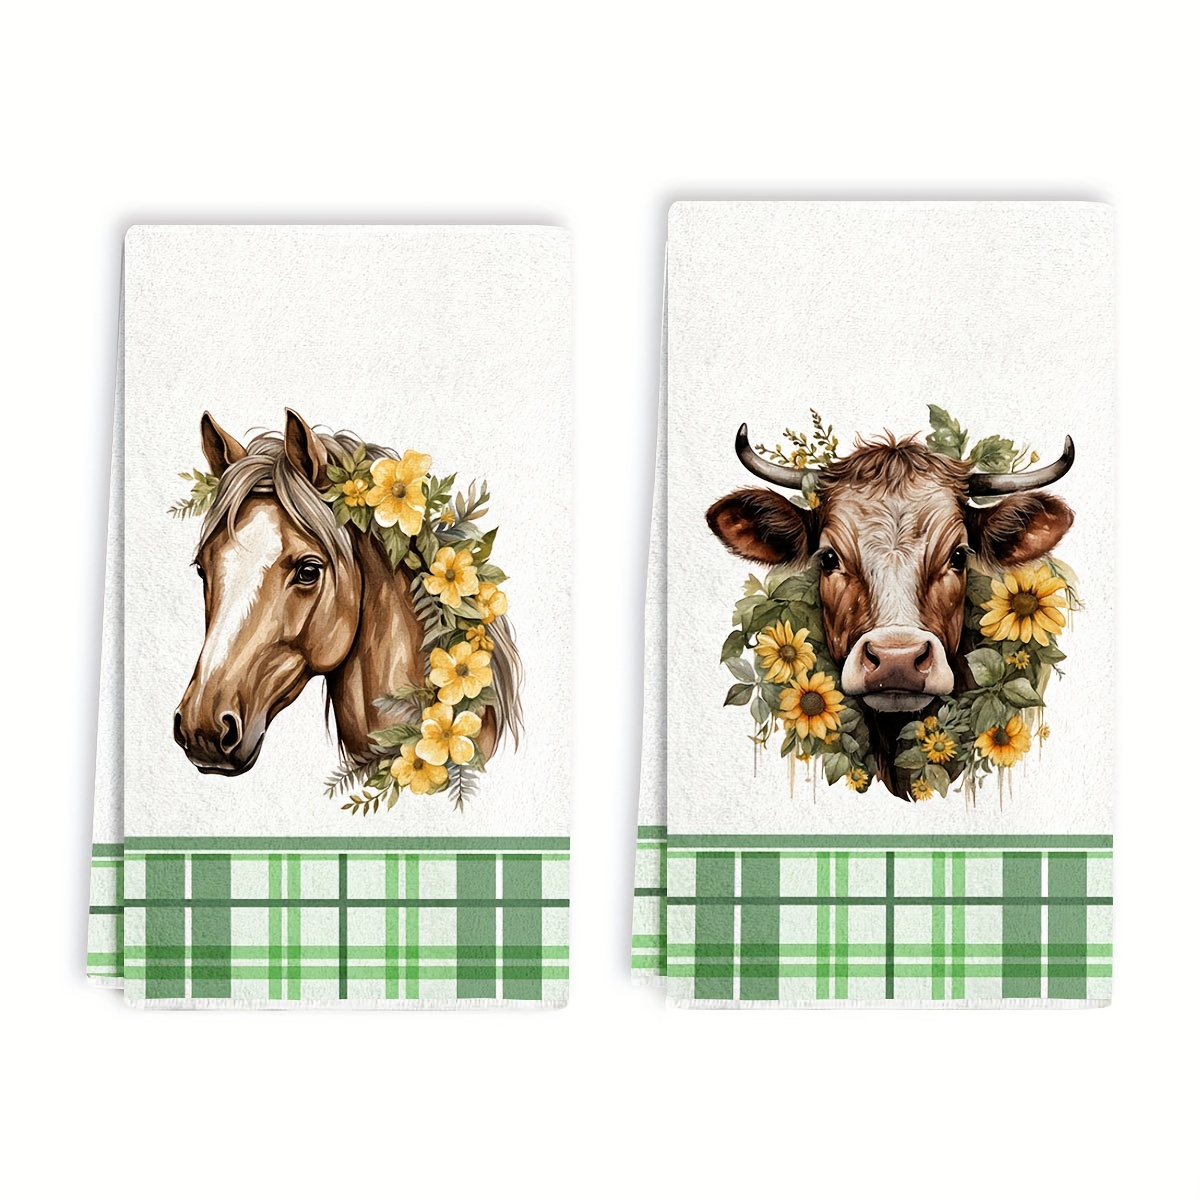 

2pcs, Hand Towels, Green And White Plaid Animal Series Pattern Dish Towels, Rustic Country Style Kitchen Towels, Soft And Absorbent Cloth Tea Towels, Cleaning Stuff, Kitchen Decor